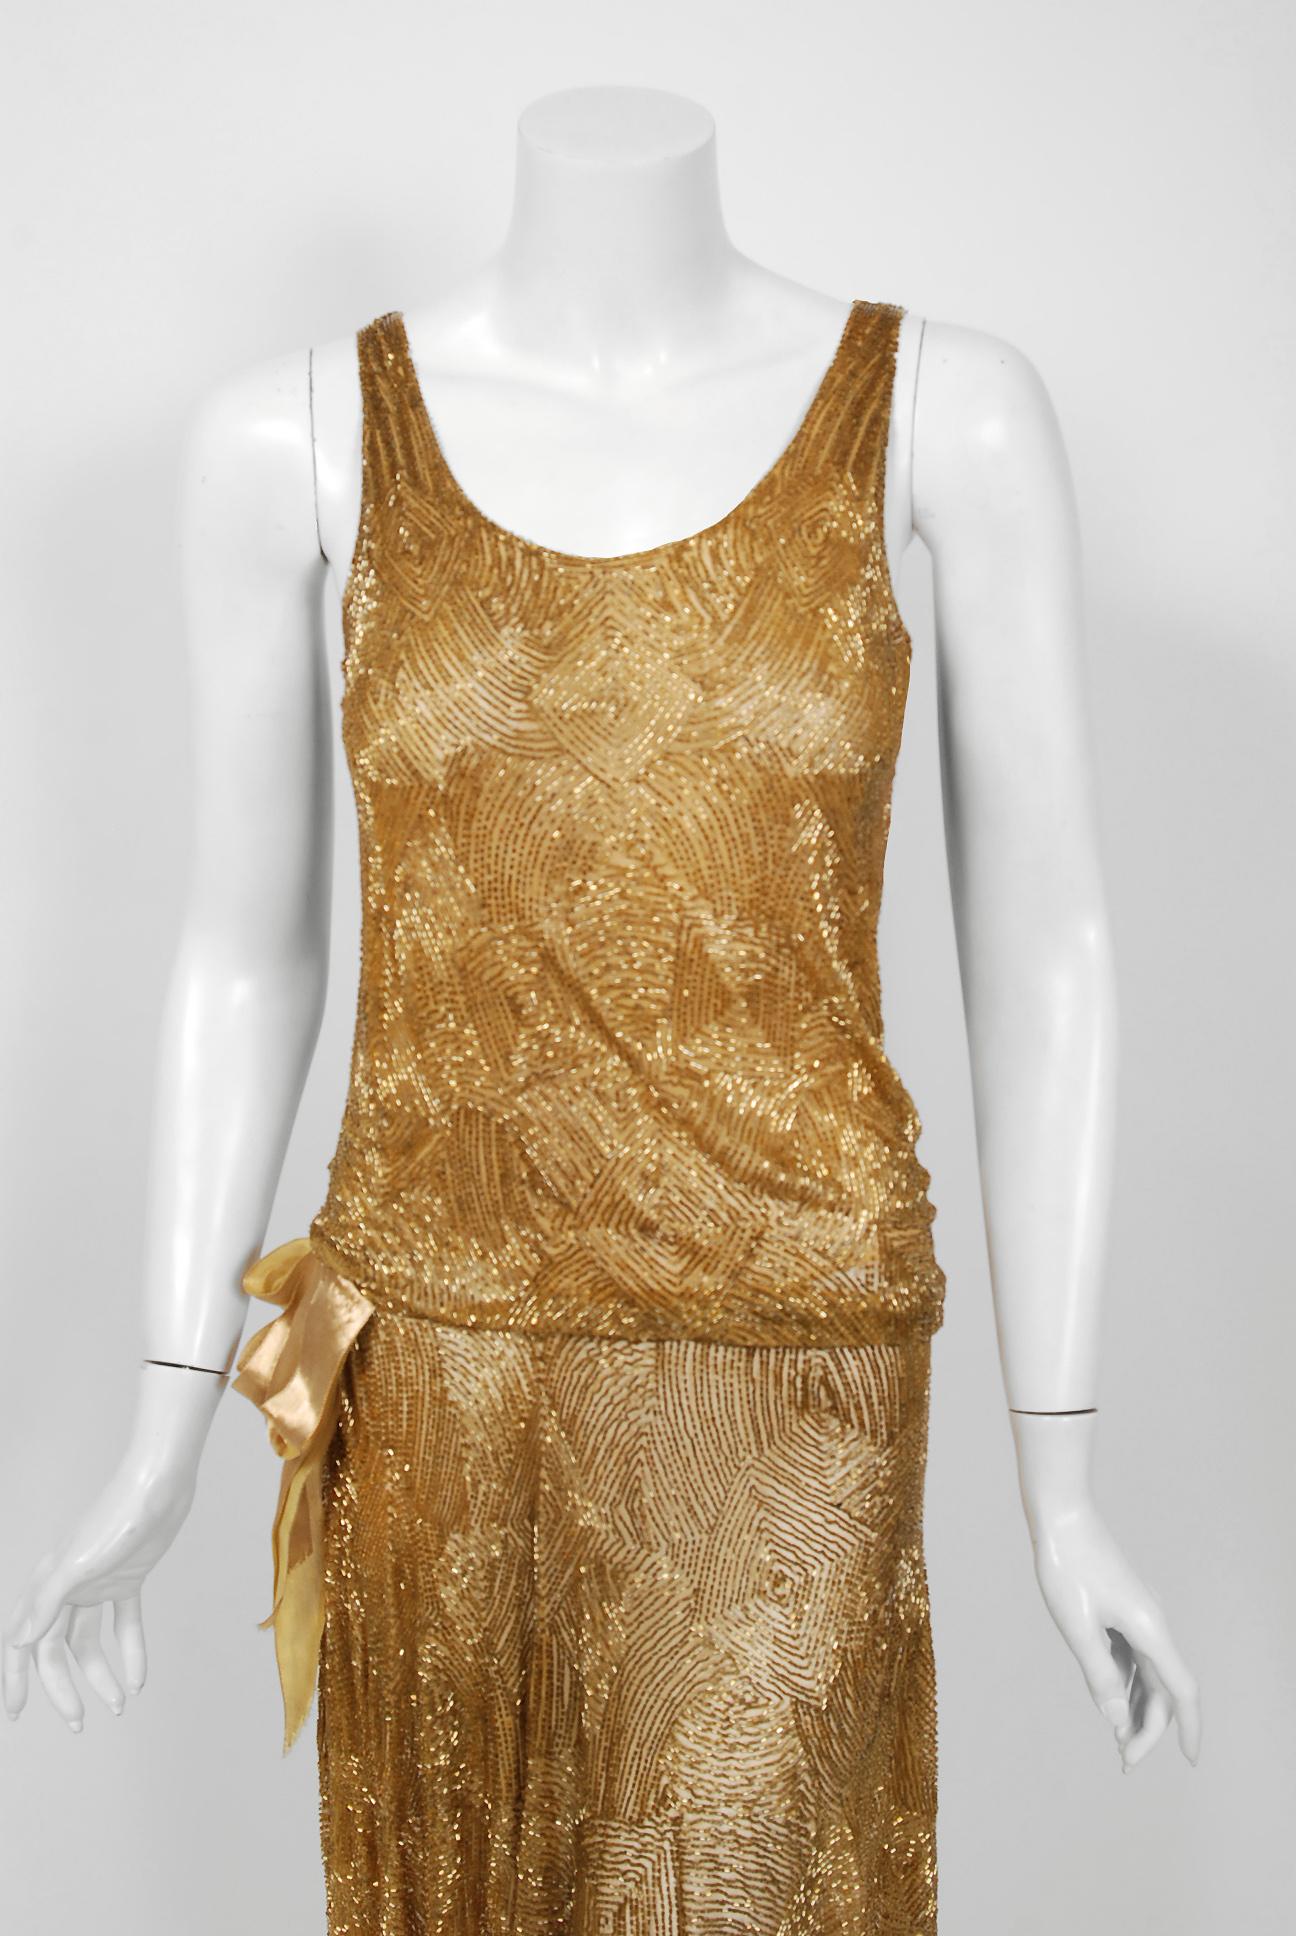 Yvonne of Paris was one of the smaller elite couture houses operating during the art-deco era. This breathtaking garment, all hand-stitched, is fashioned with golden bugle beads on matching gold cotton-net and an inner cotton netting to help keep